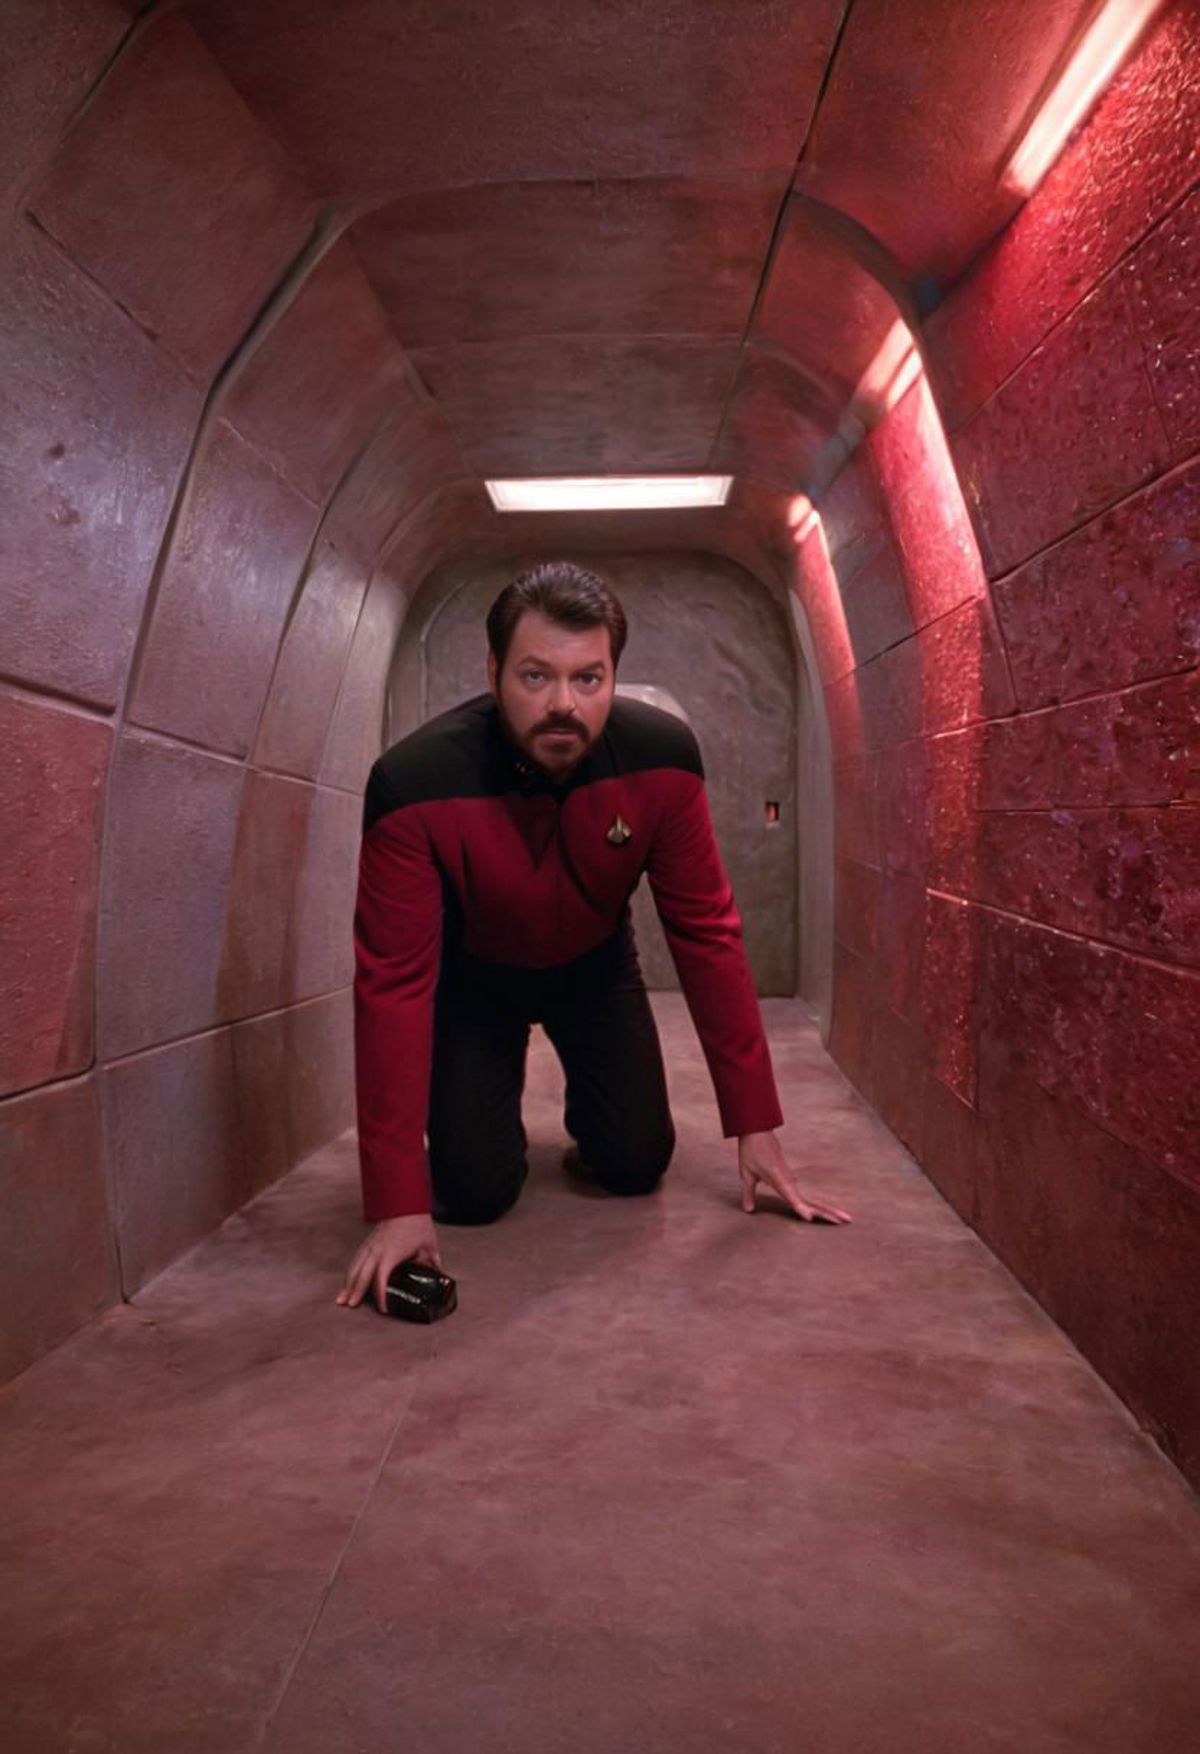 A man in a red shirt is crouching down in a small room.